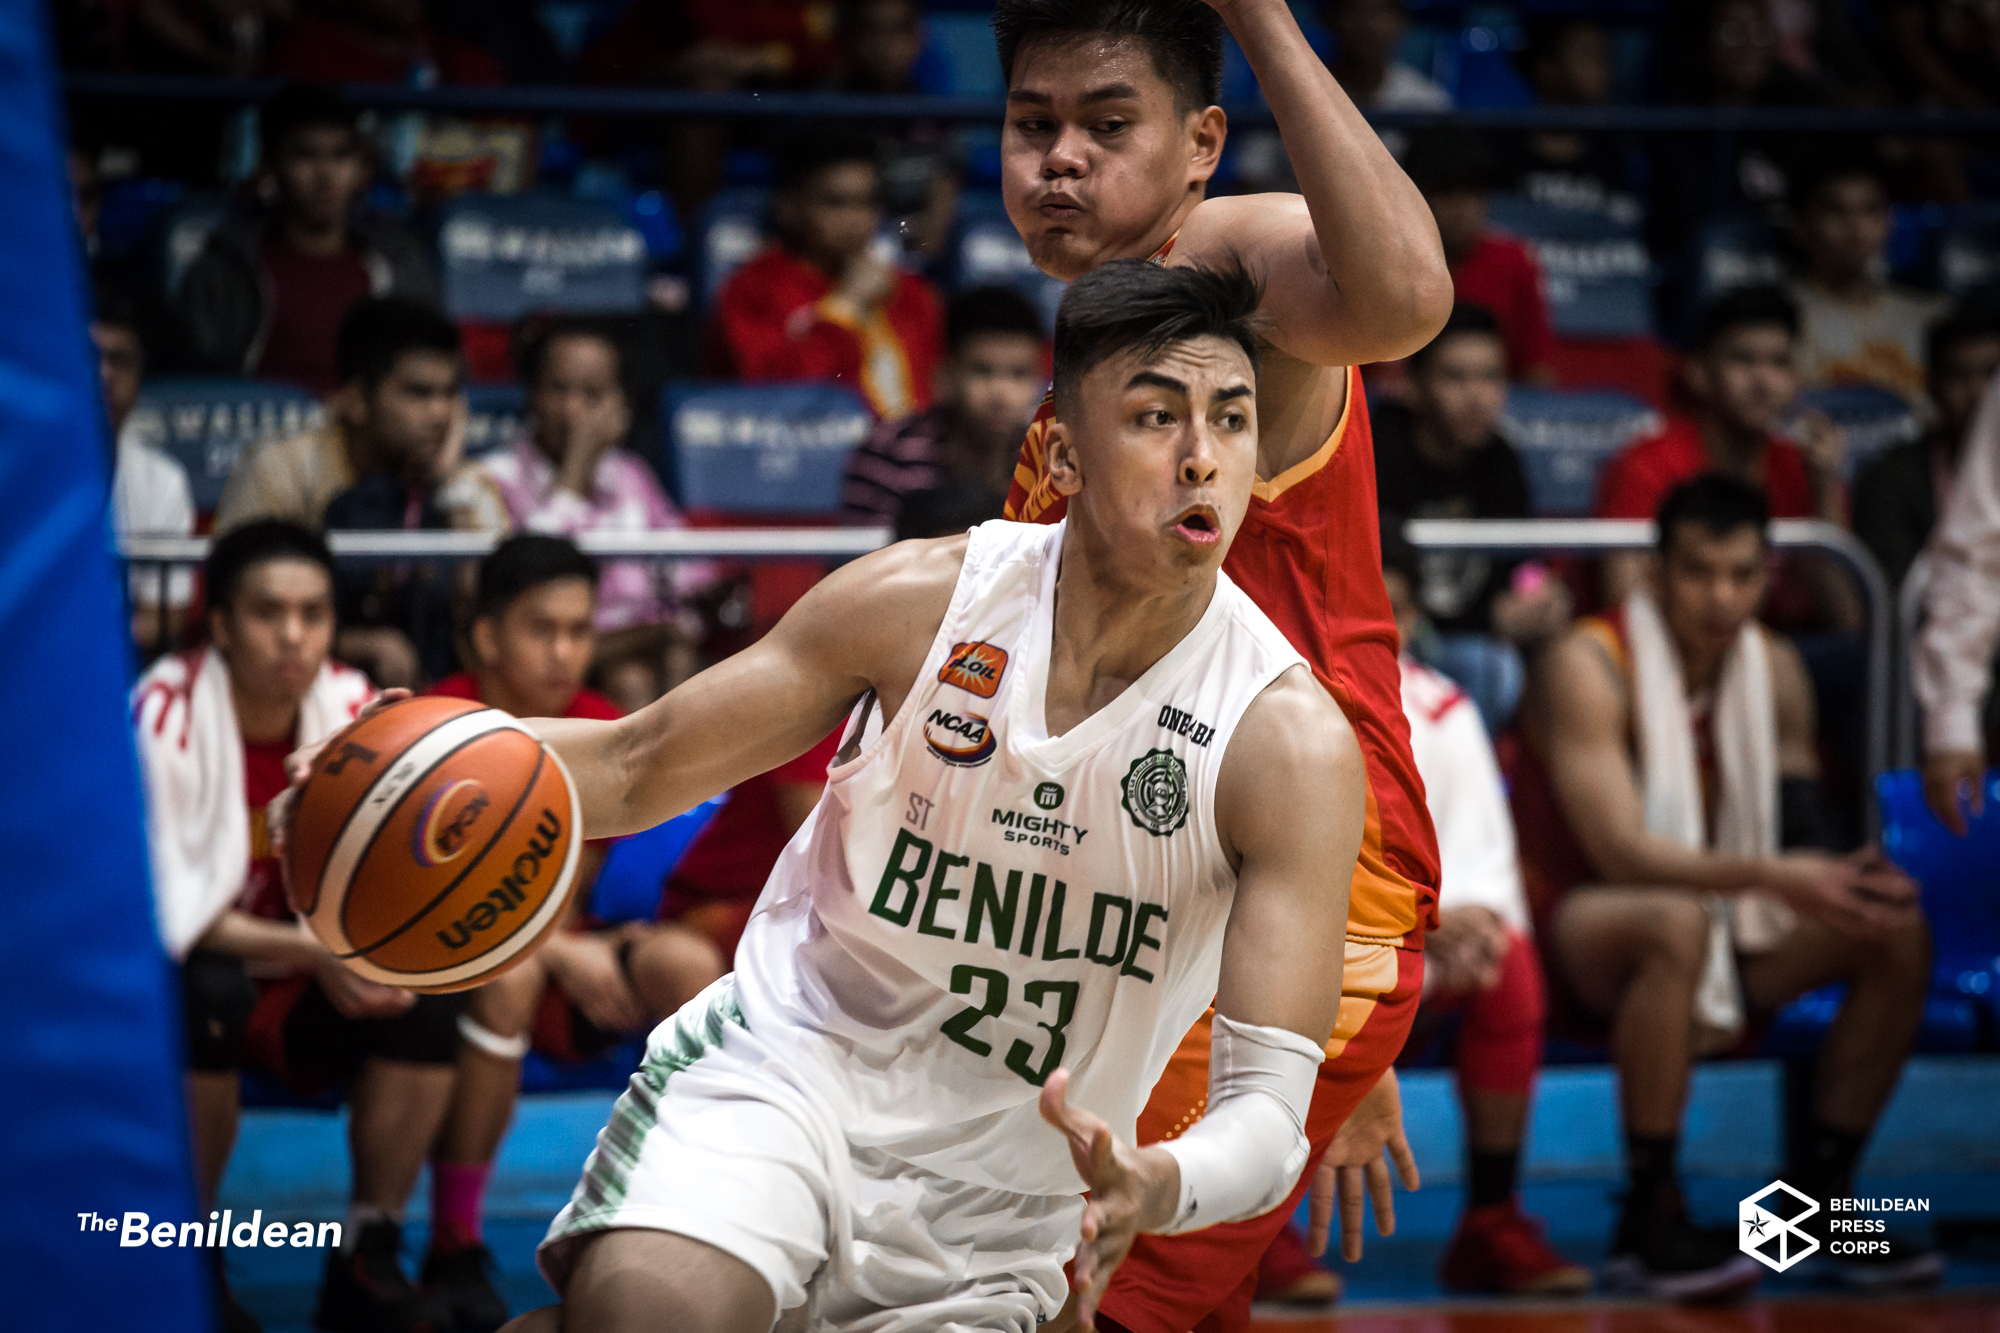 Blazers bow to Stags in NCAA Season 94 opener